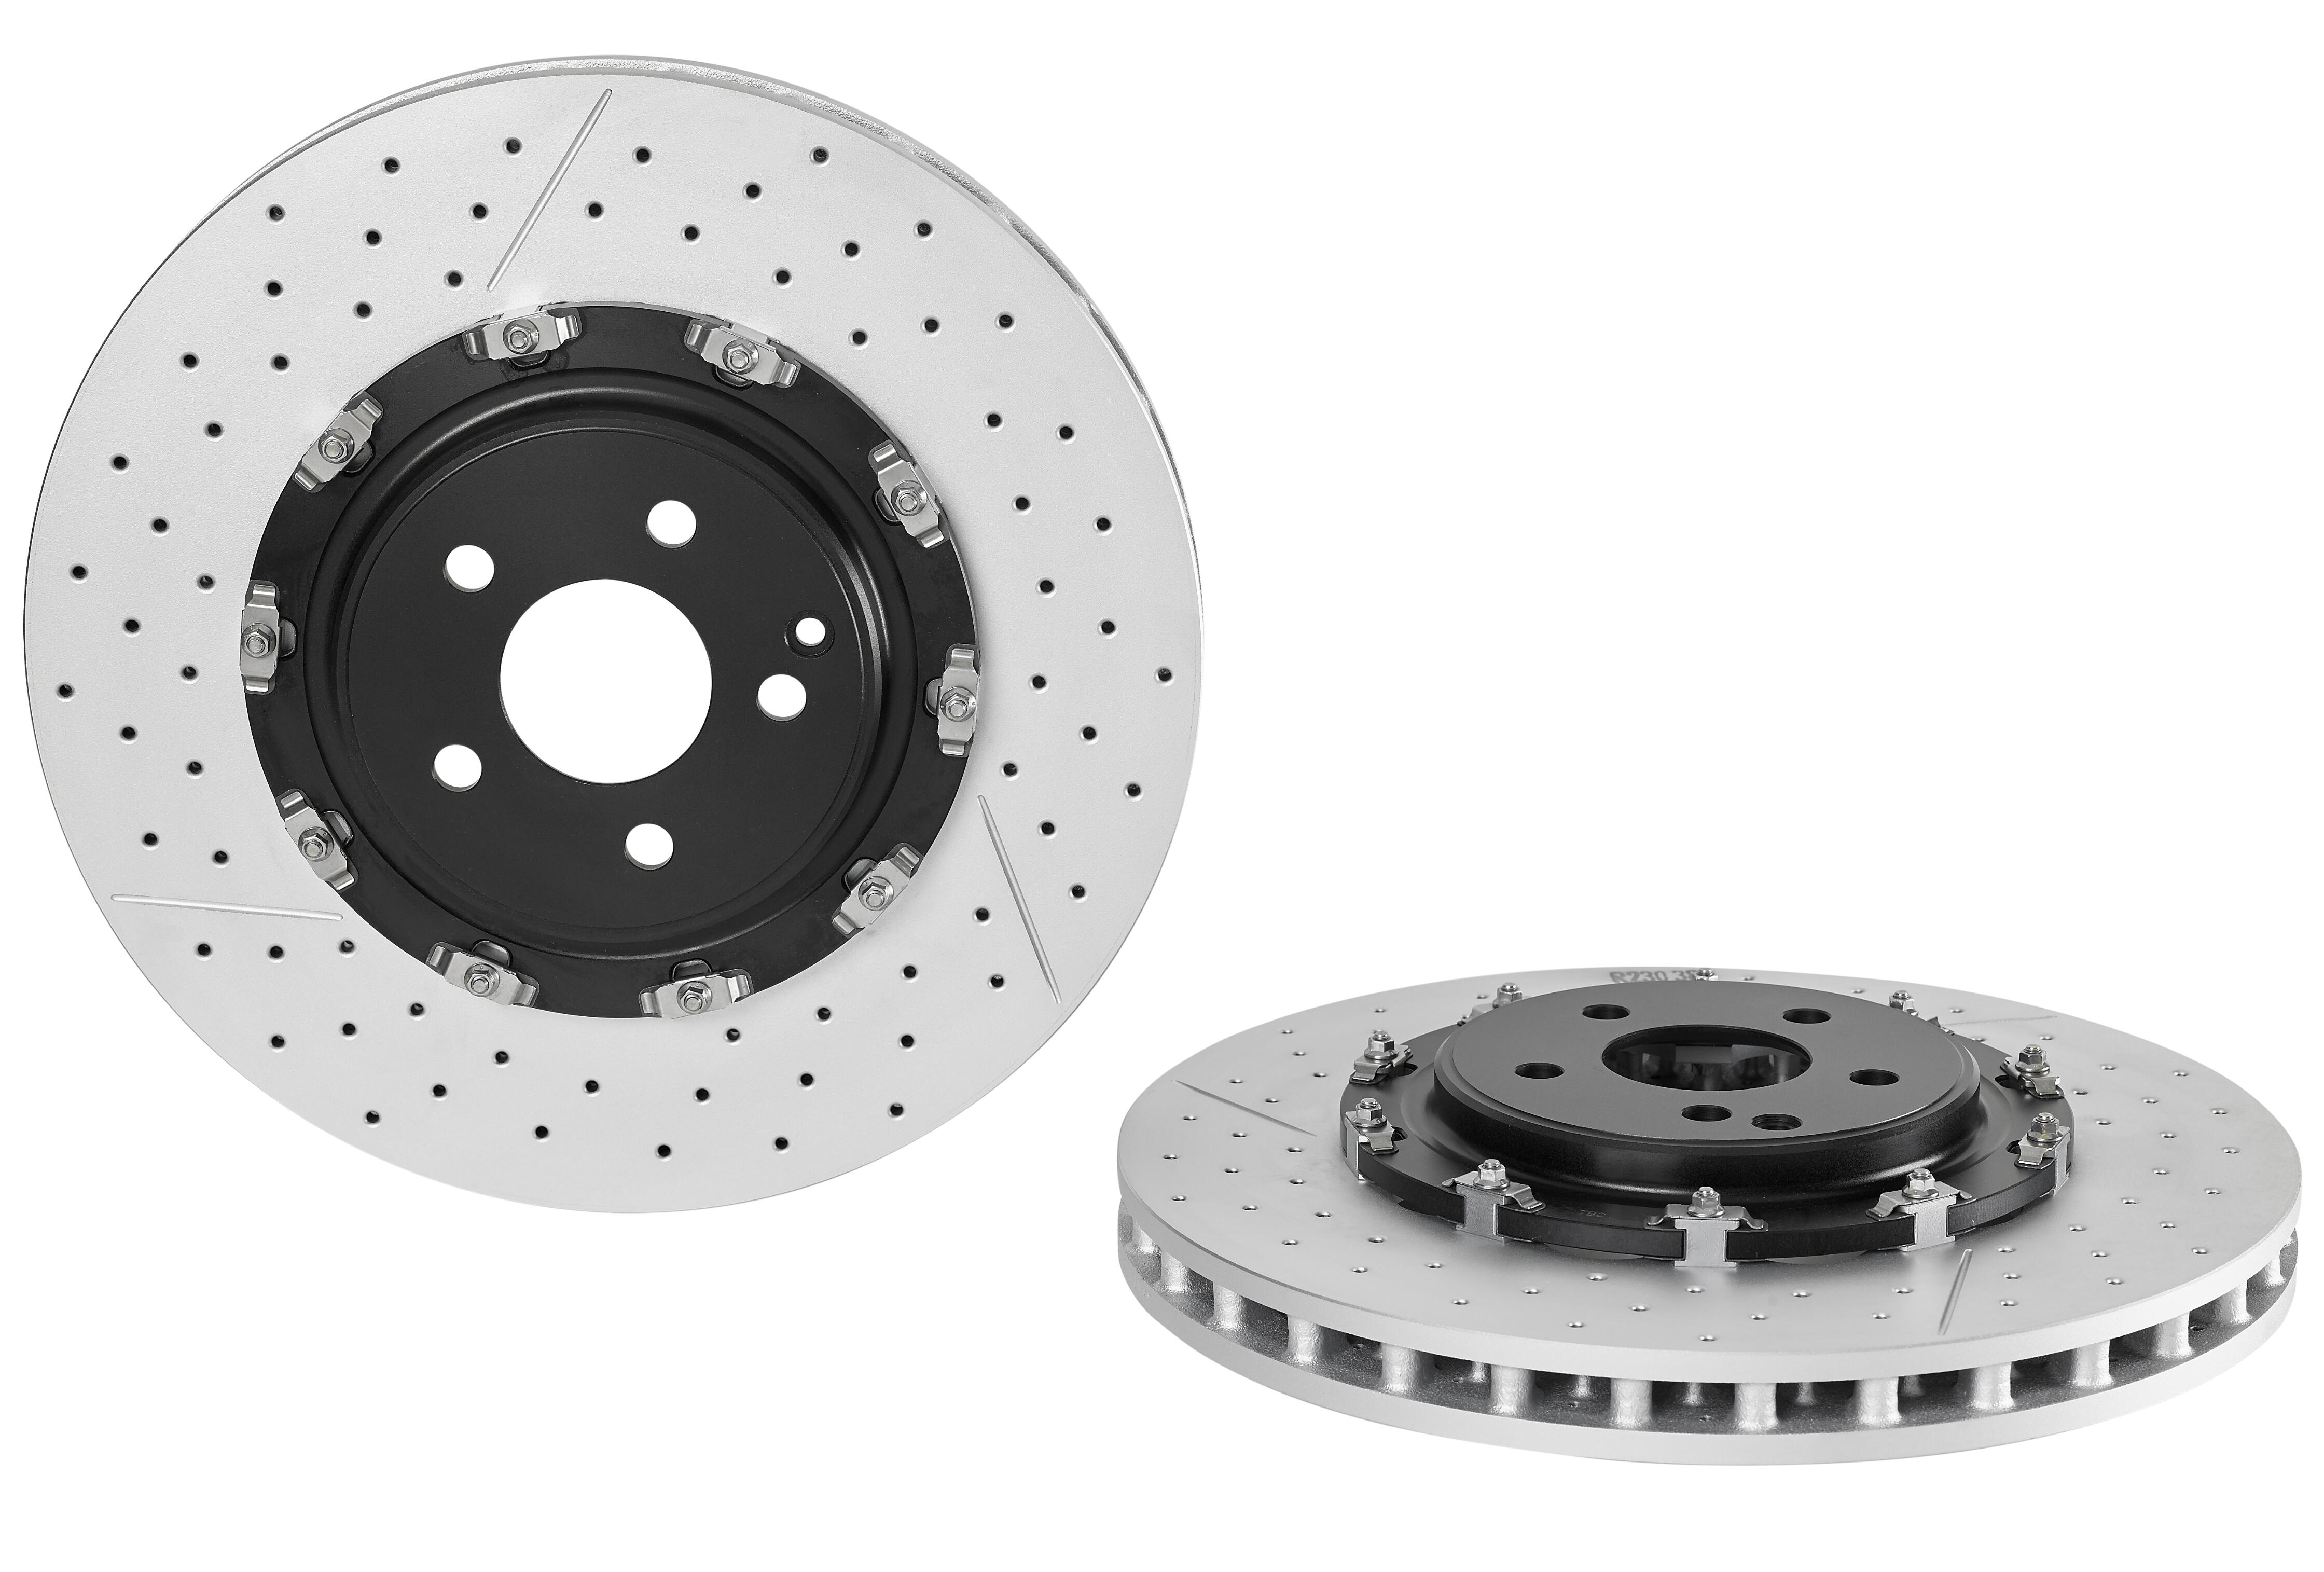 Brembo Brake Pads and Rotors Kit - Front and Rear (380mm/330mm) (Low-Met)